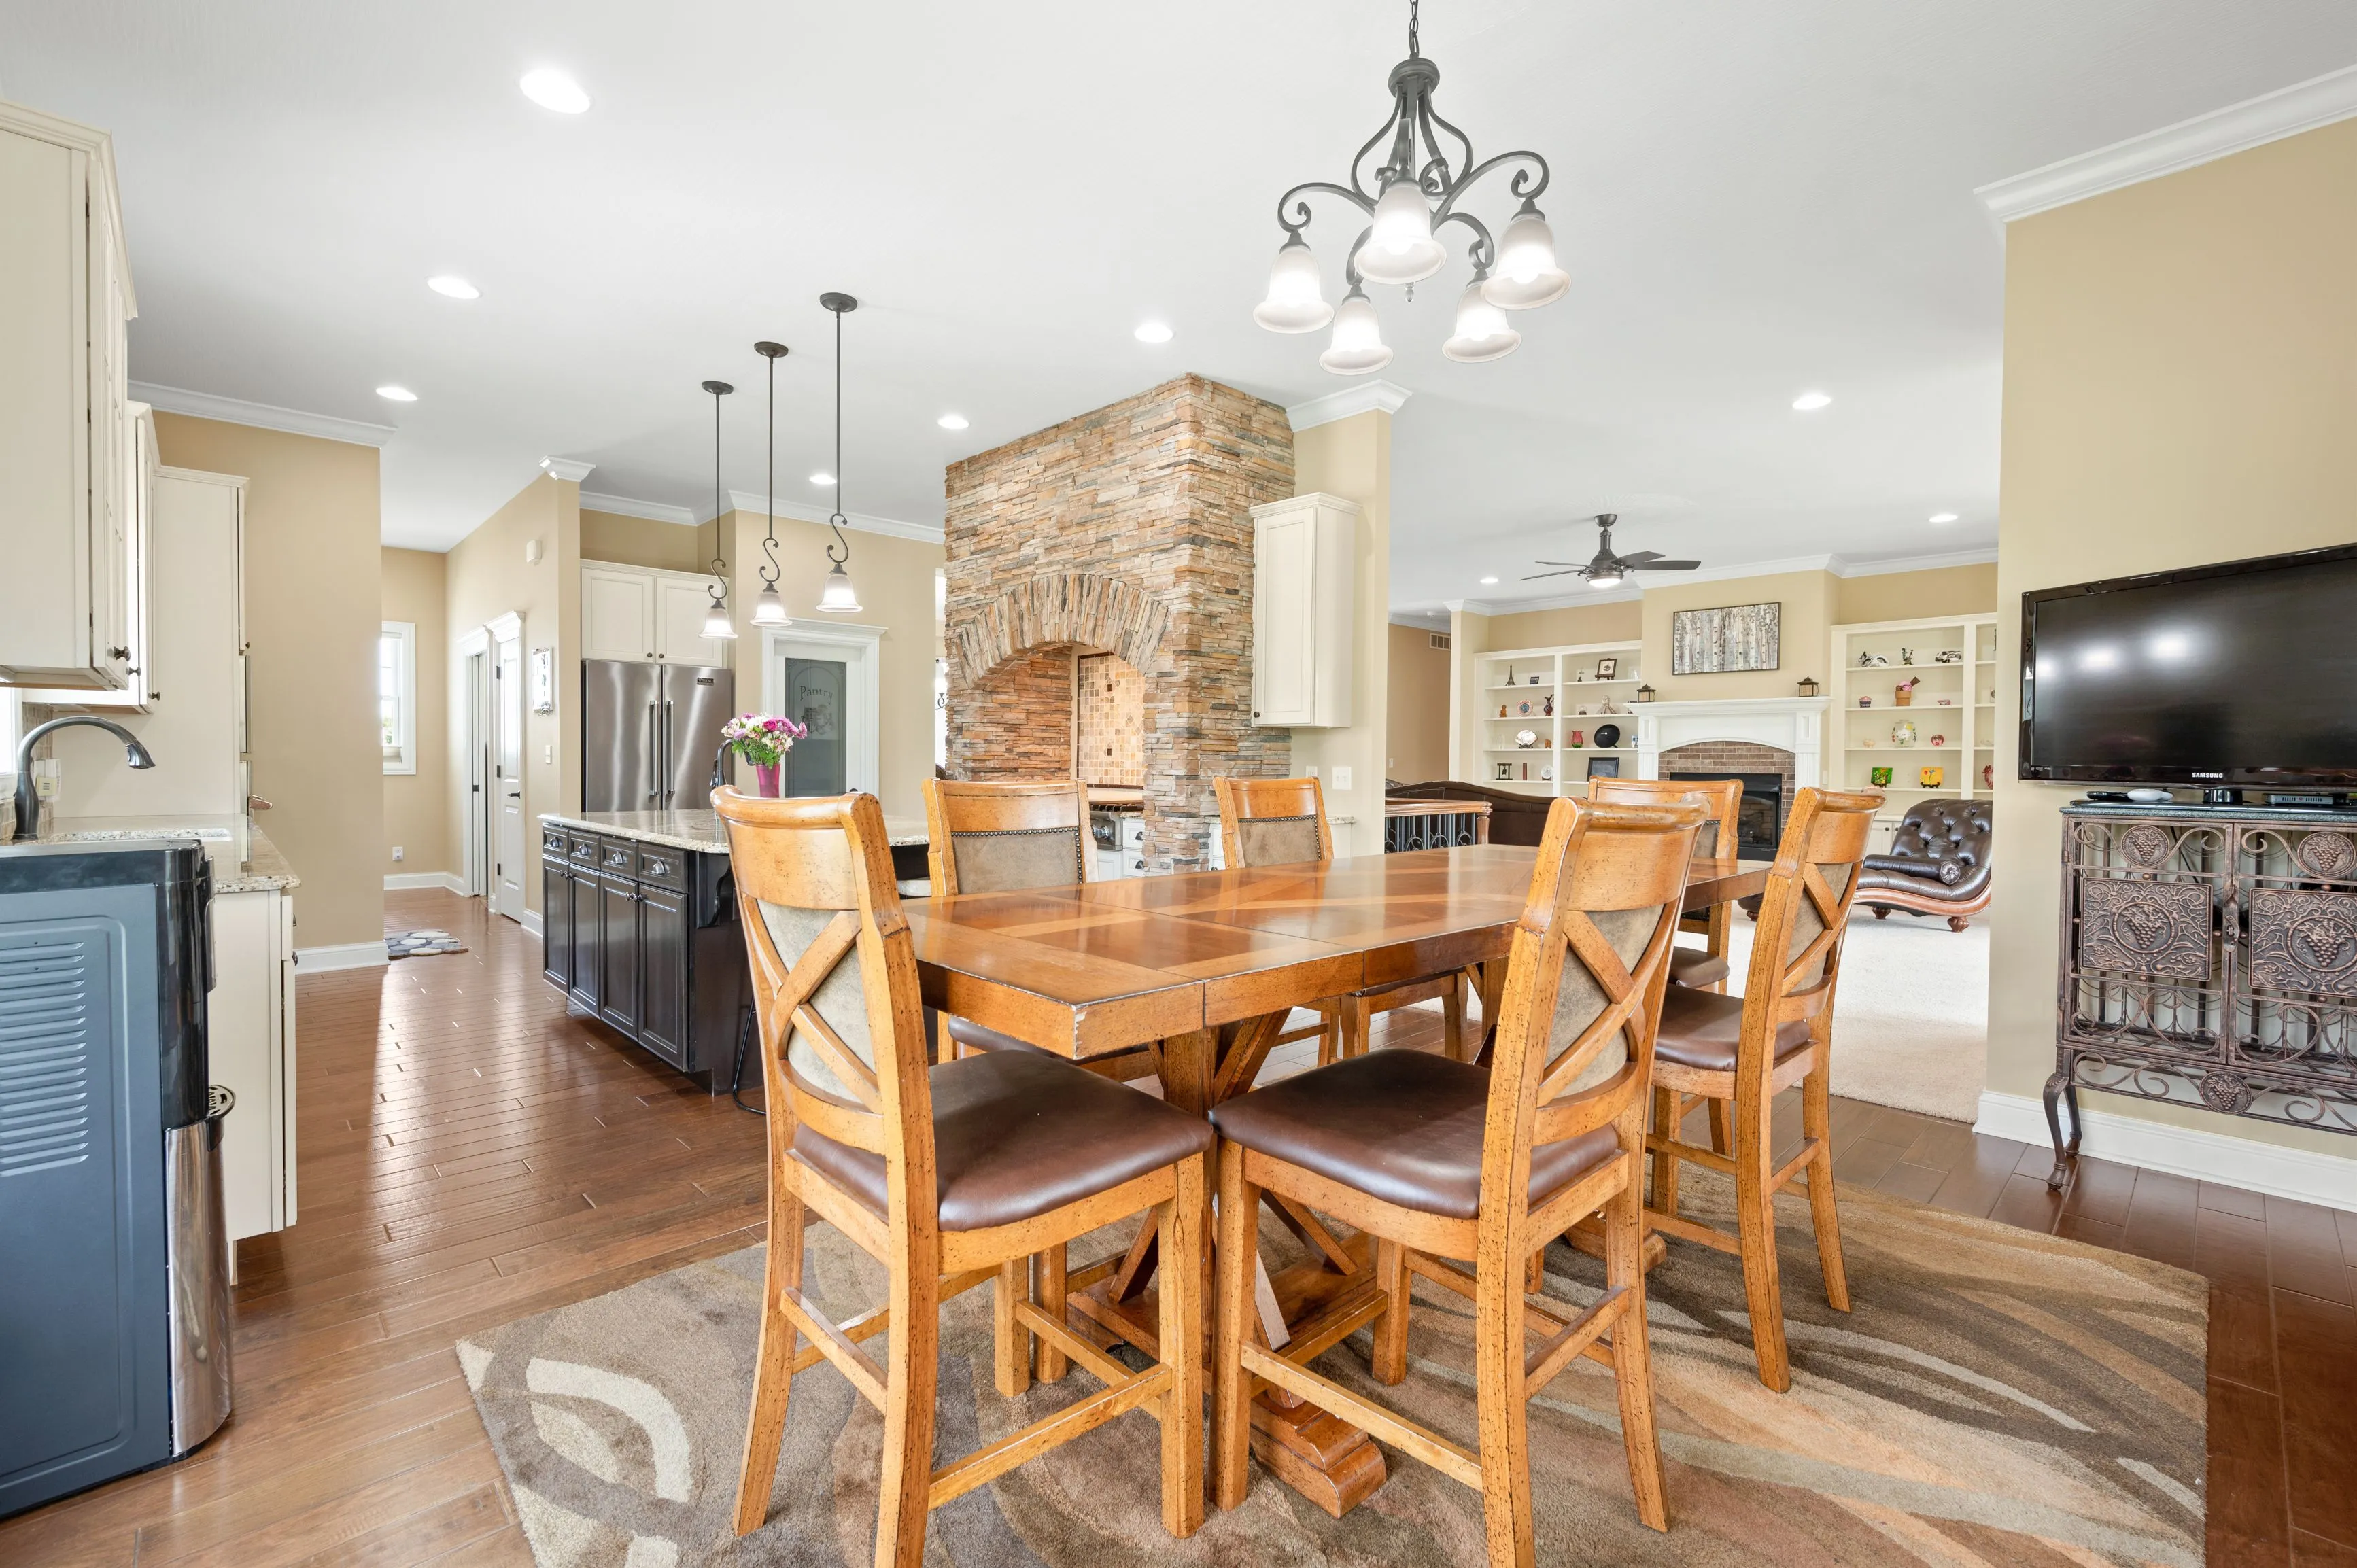 Spacious dining area with a large wooden table, leather chairs, hardwood floors, a stone fireplace, and an open kitchen with stainless steel appliances.